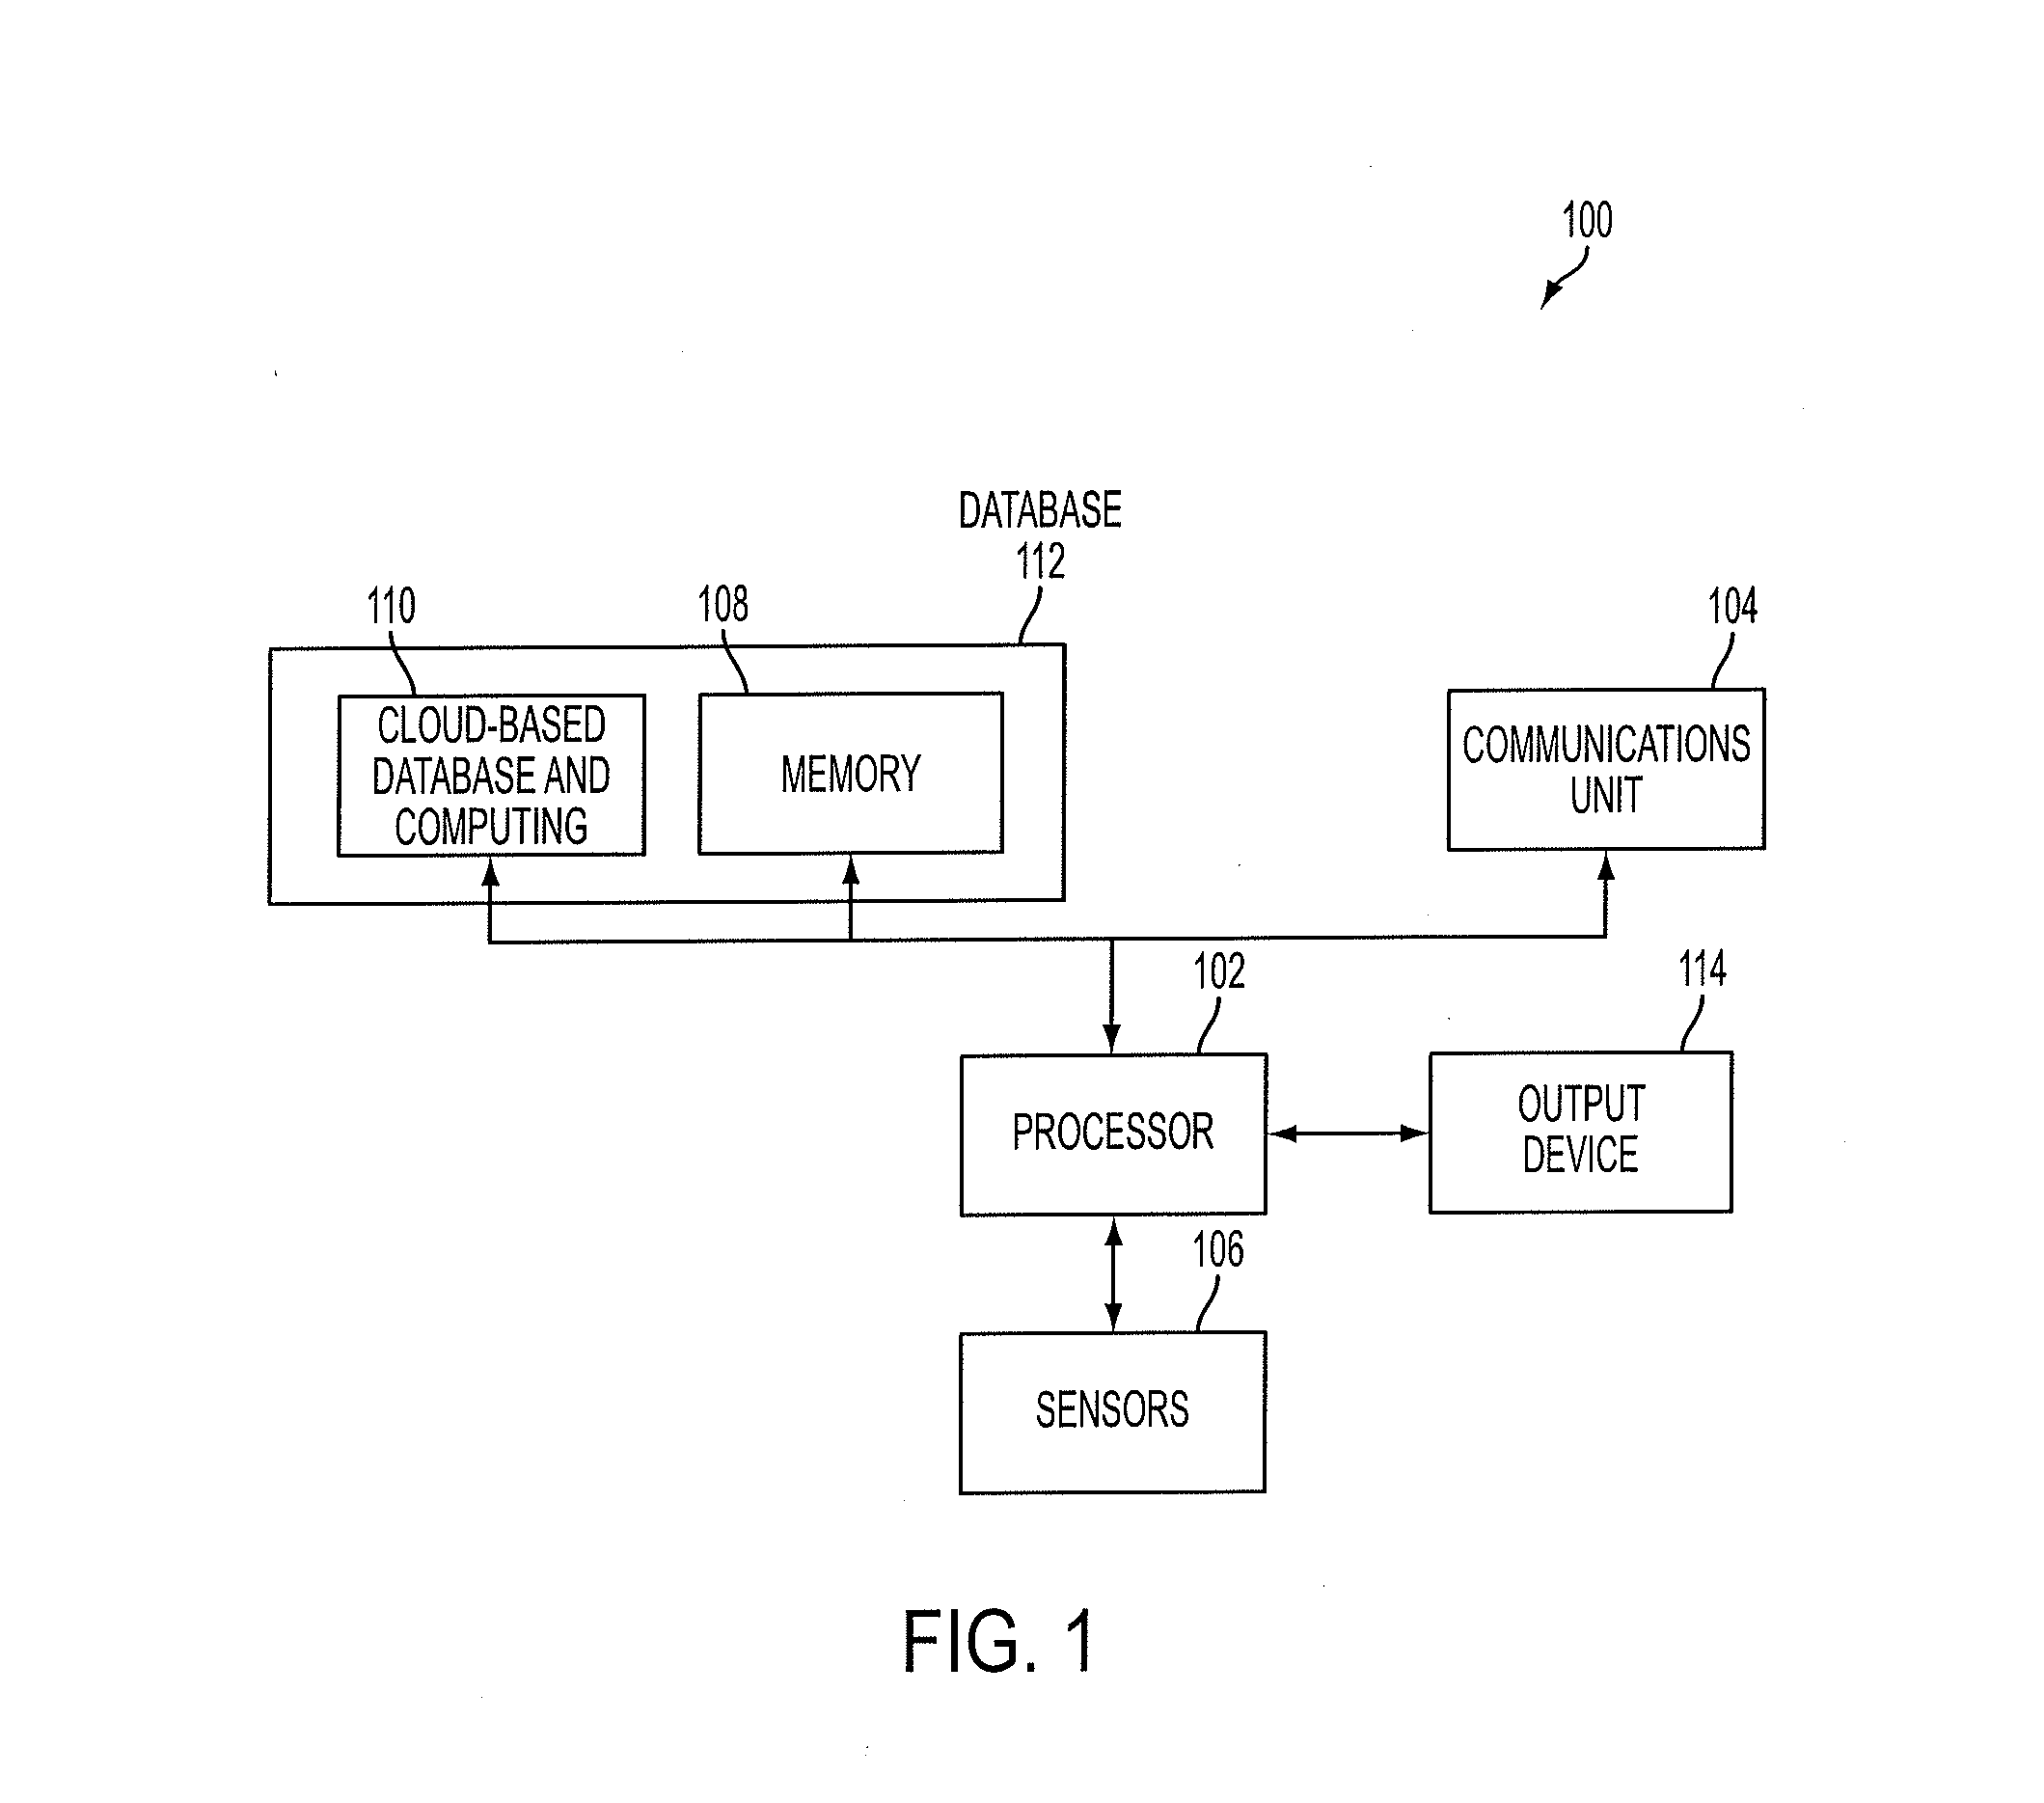 Computer-based method and system for providing active and automatic personal assistance using a robotic device/platform